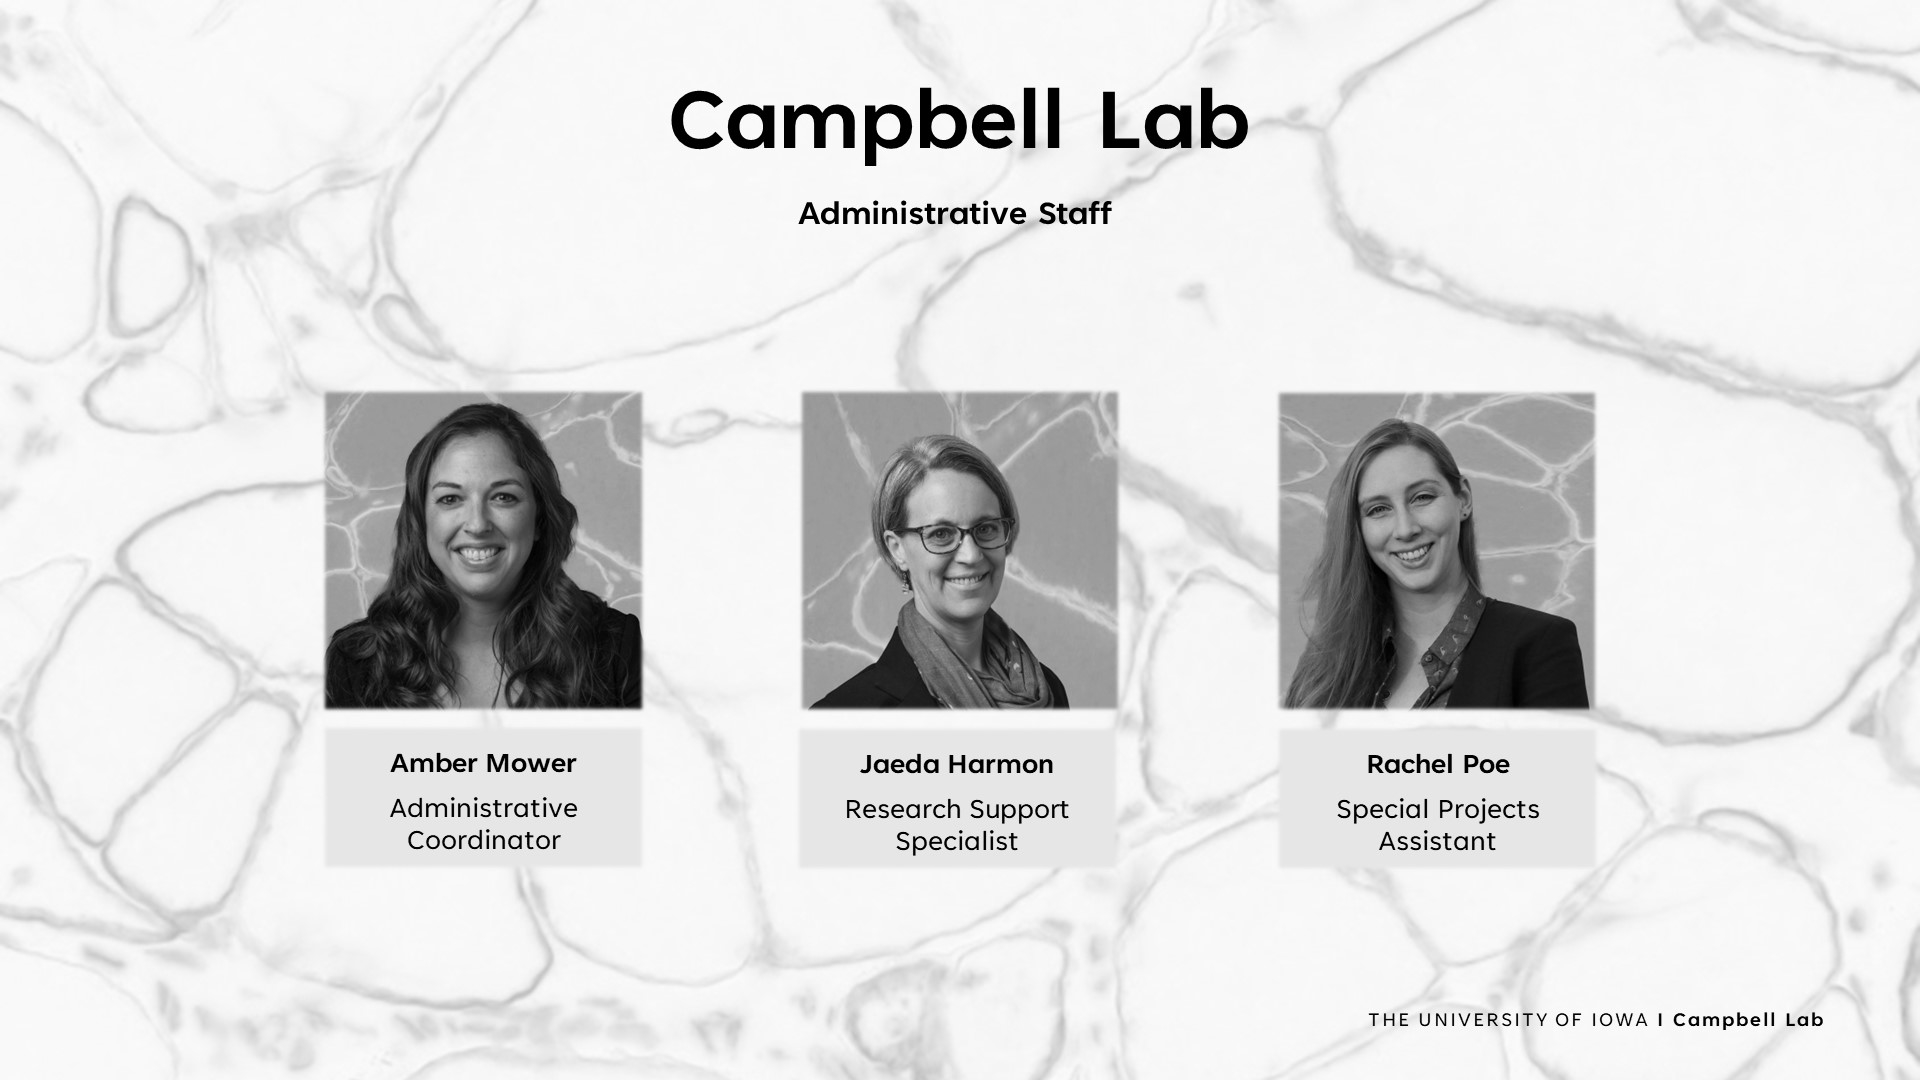 Photos of Campbell Lab Admin Staff